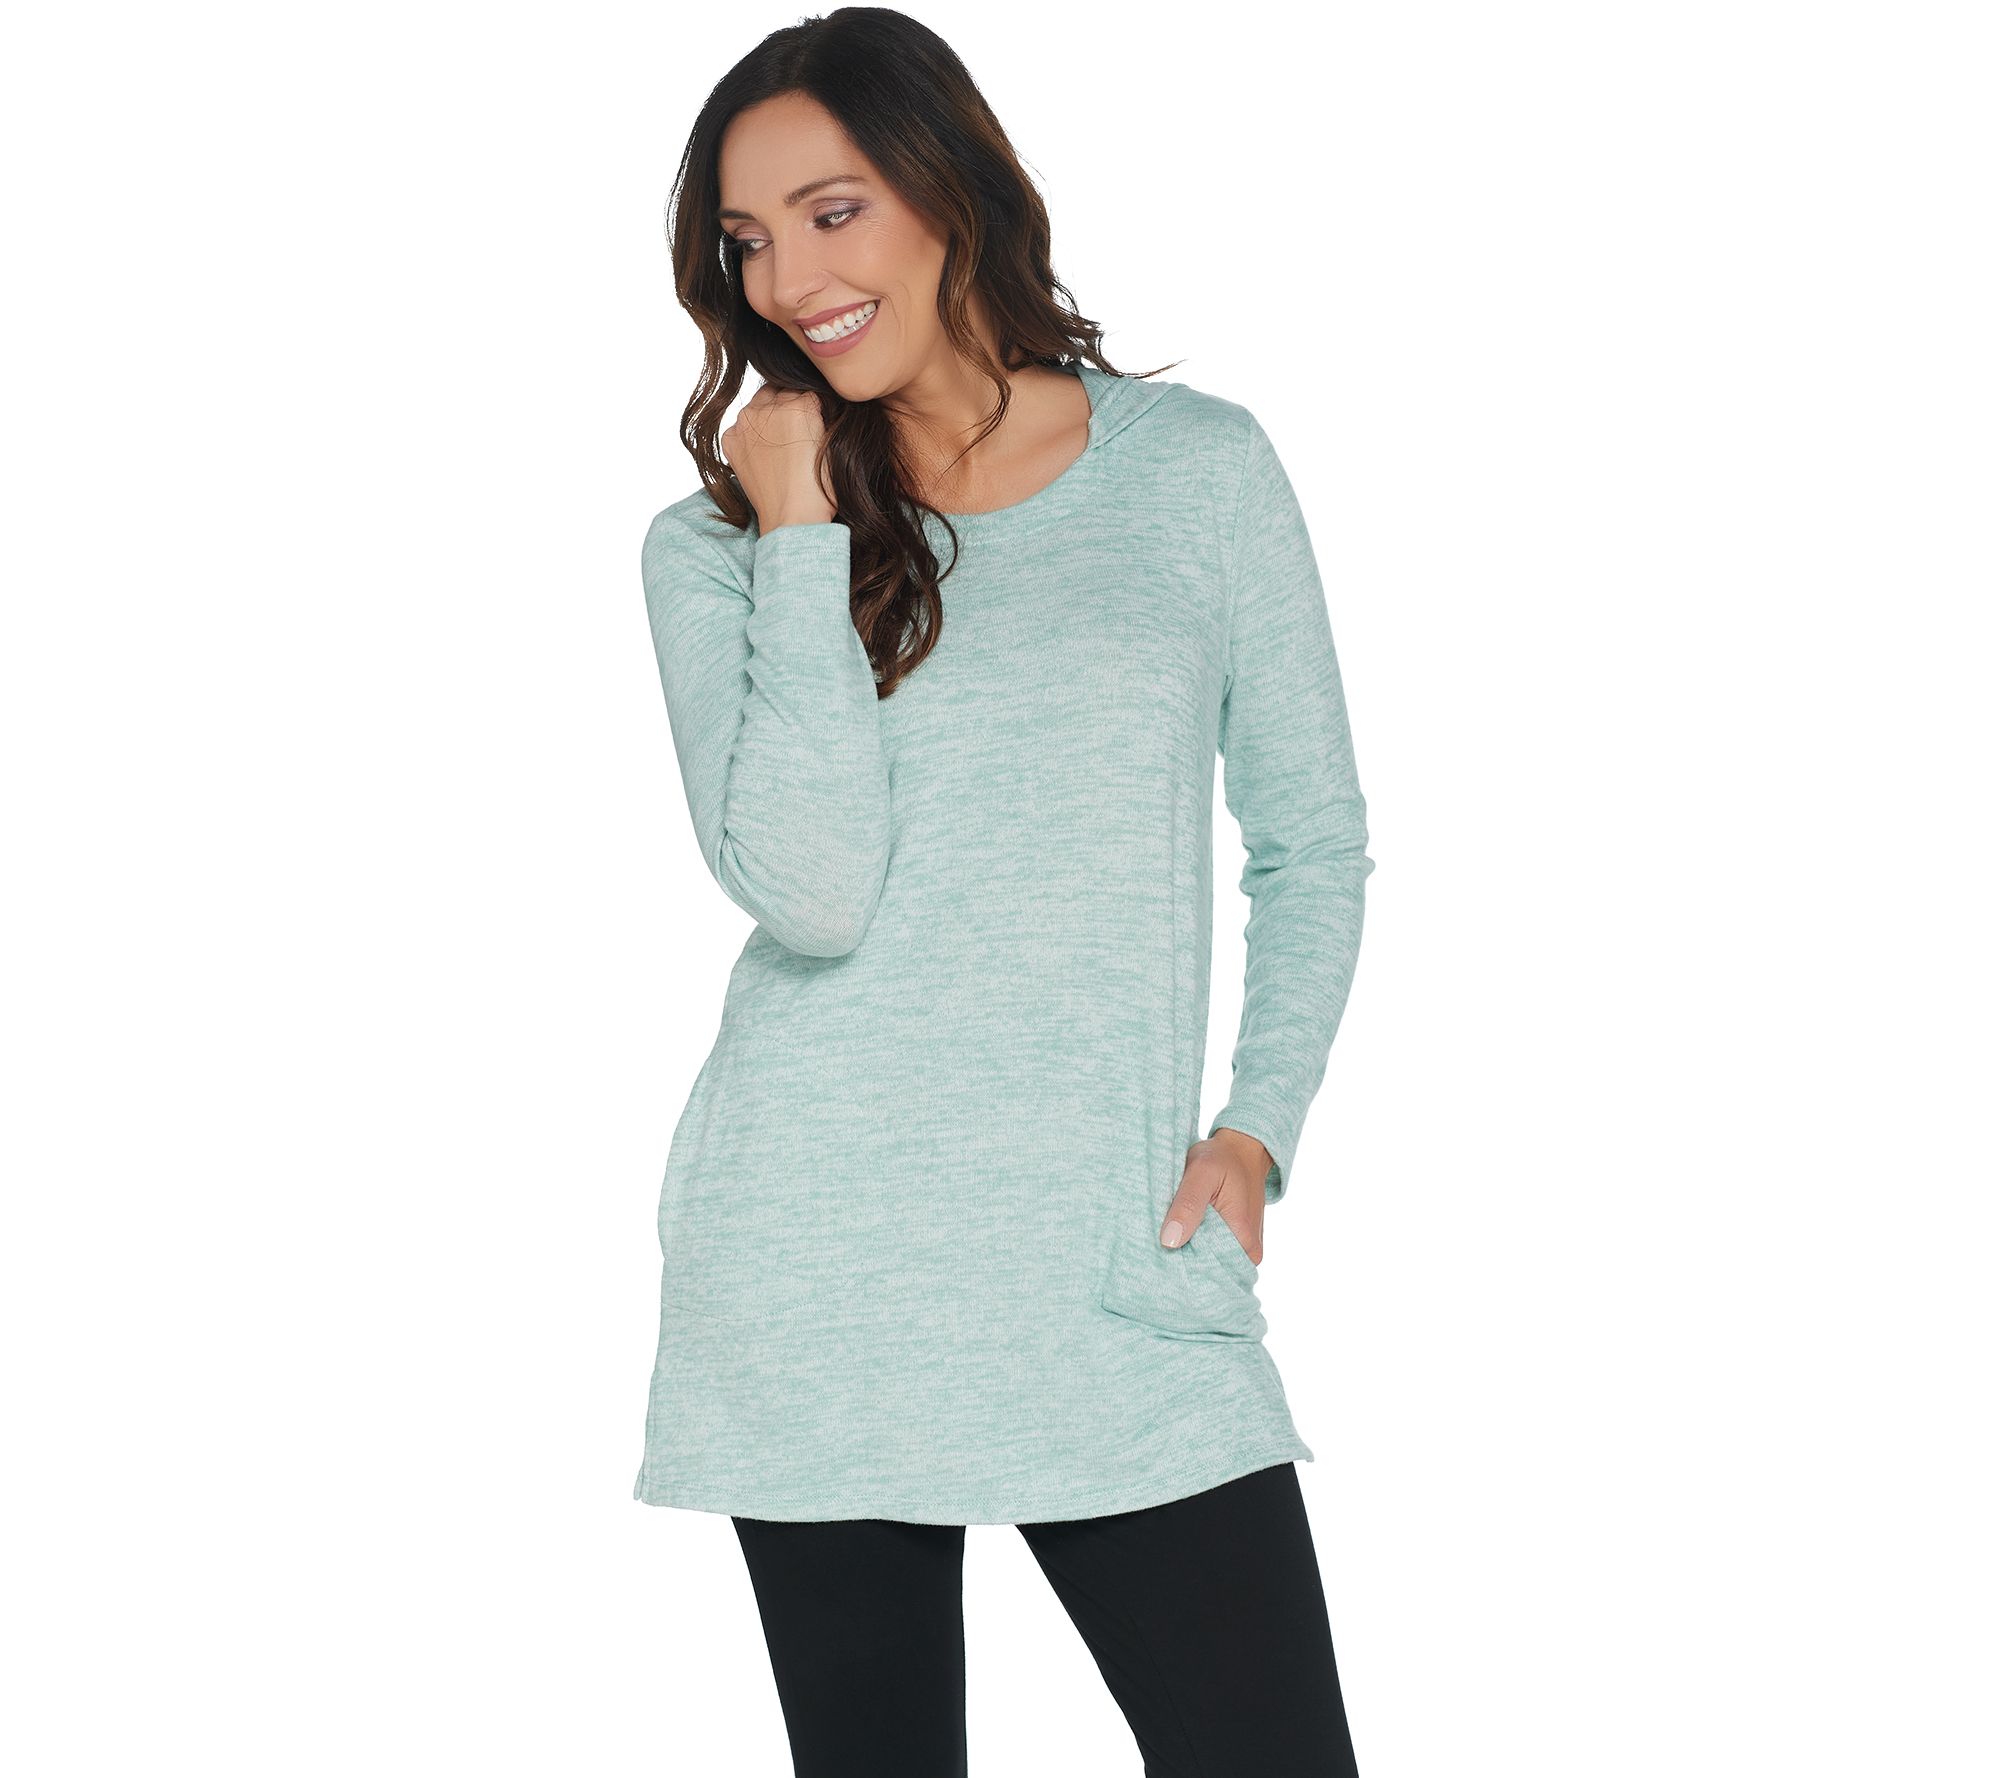 Denim & Co. Petite Brushed Heavenly Jersey Tunic with Hood - QVC.com